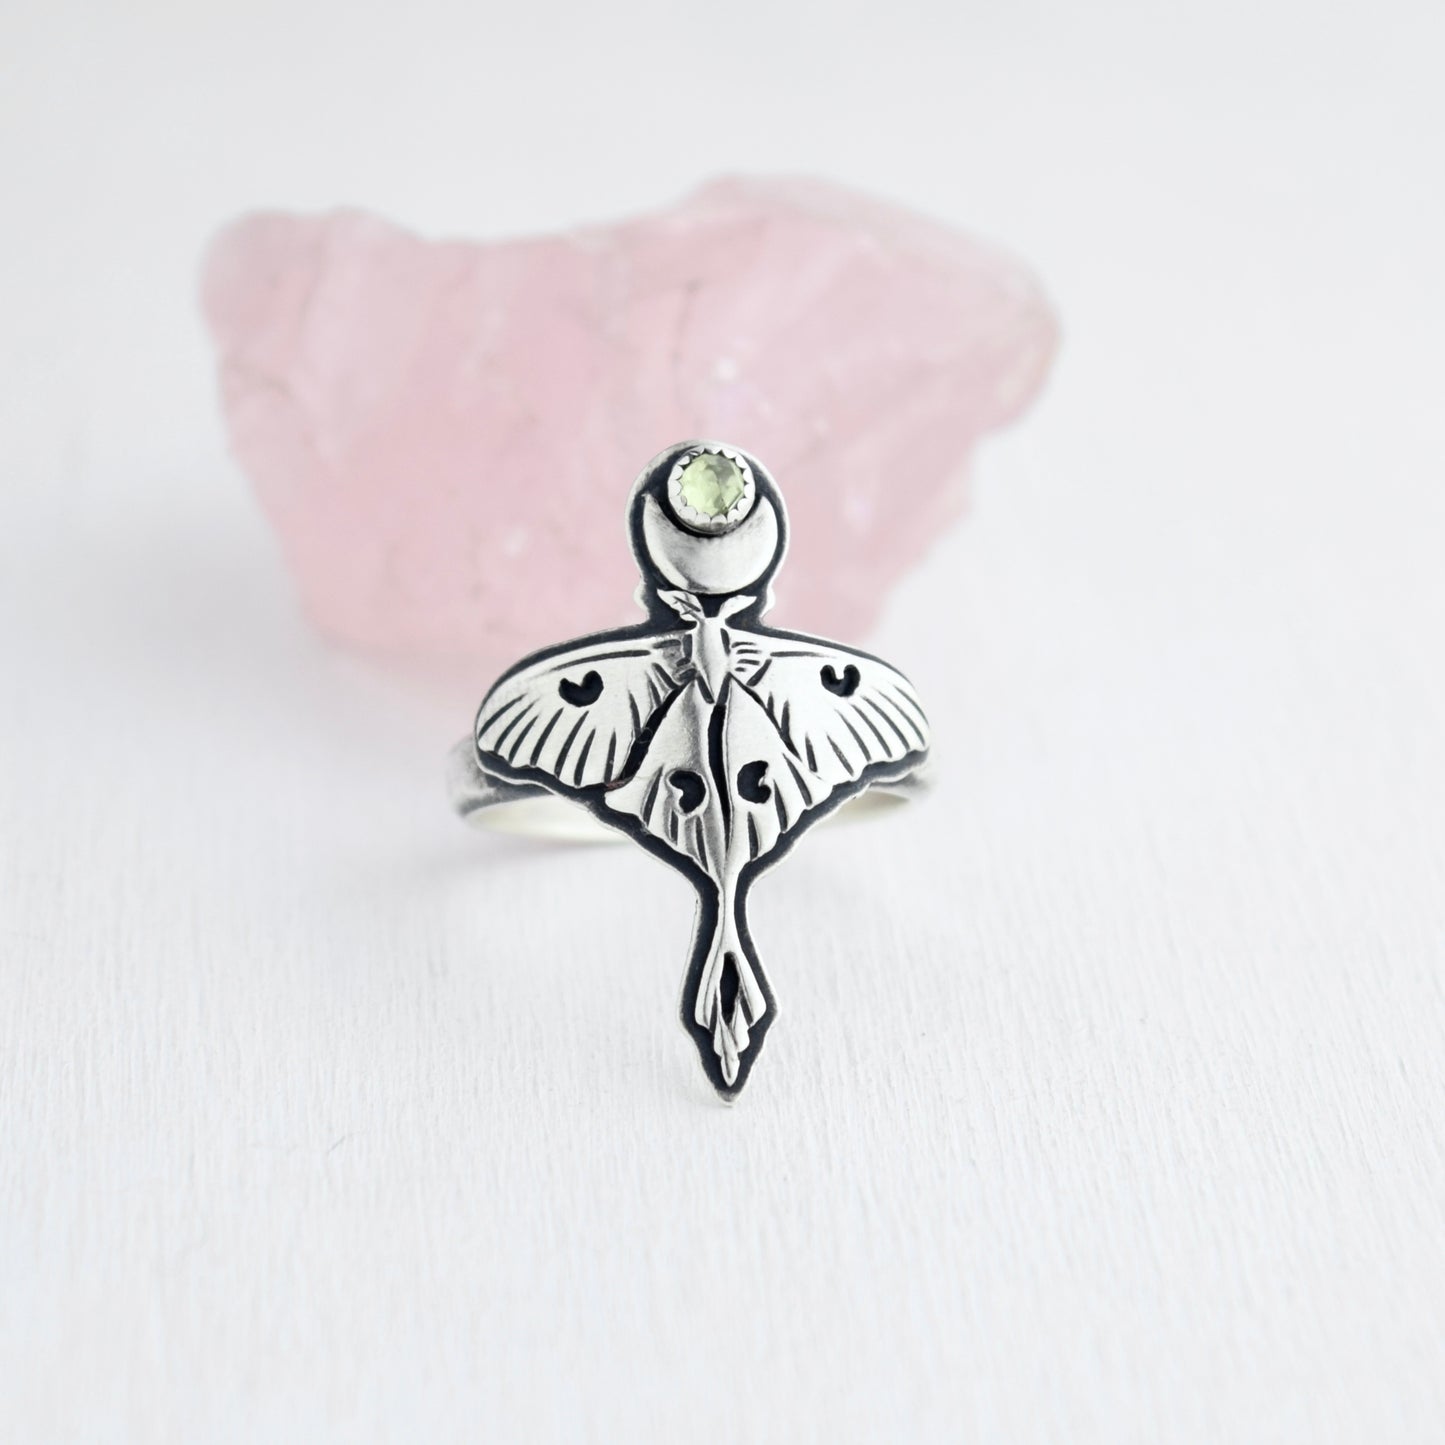 Luna Moth Ring with Peridot size 7